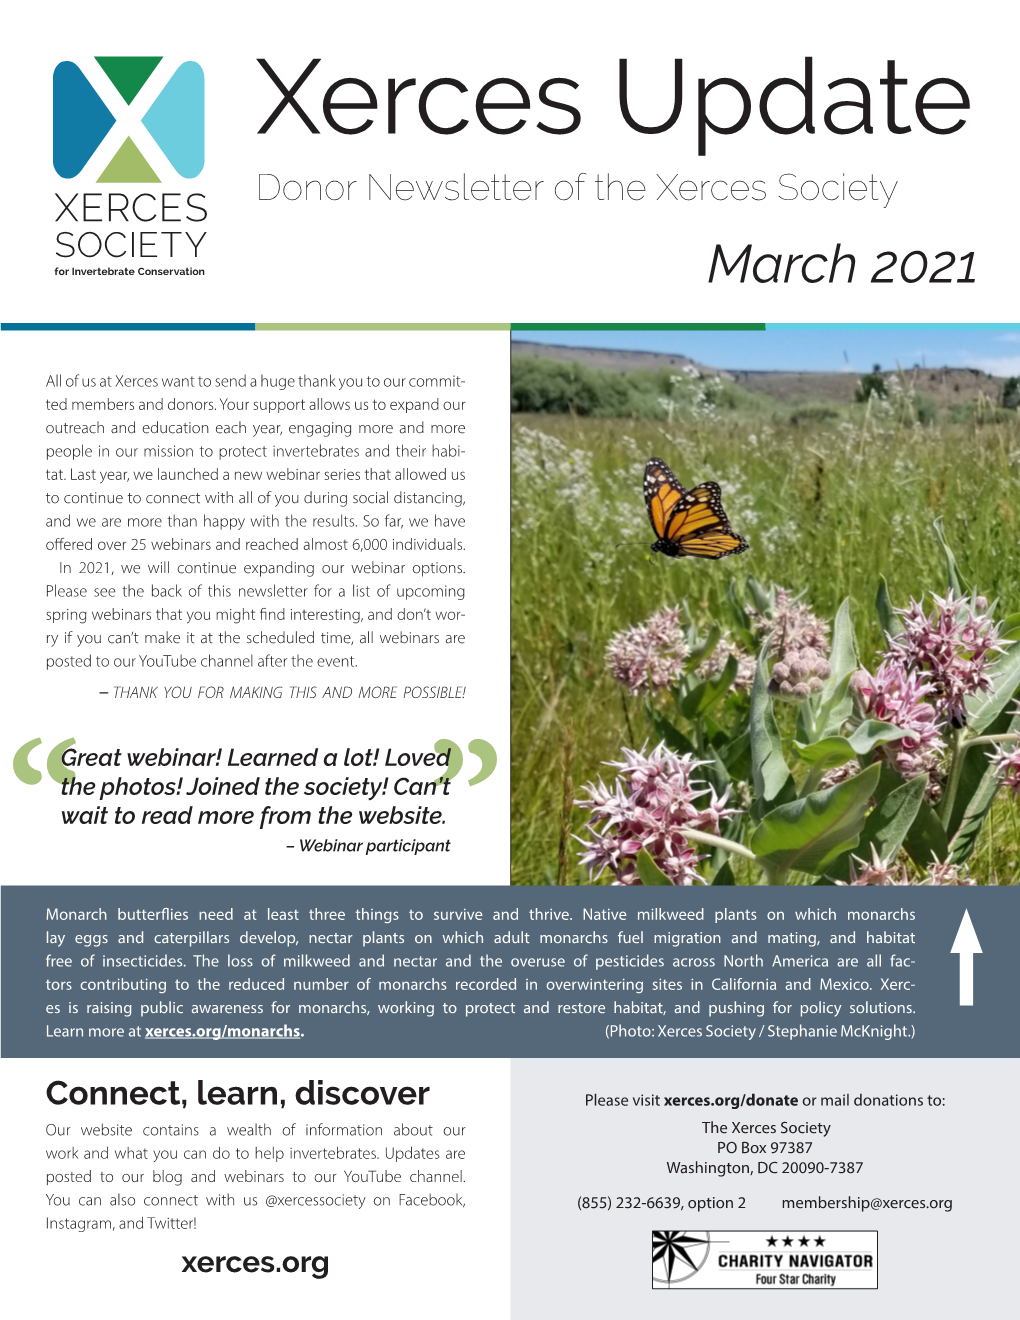 Xerces Update Donor Newsletter of the Xerces Society March 2021